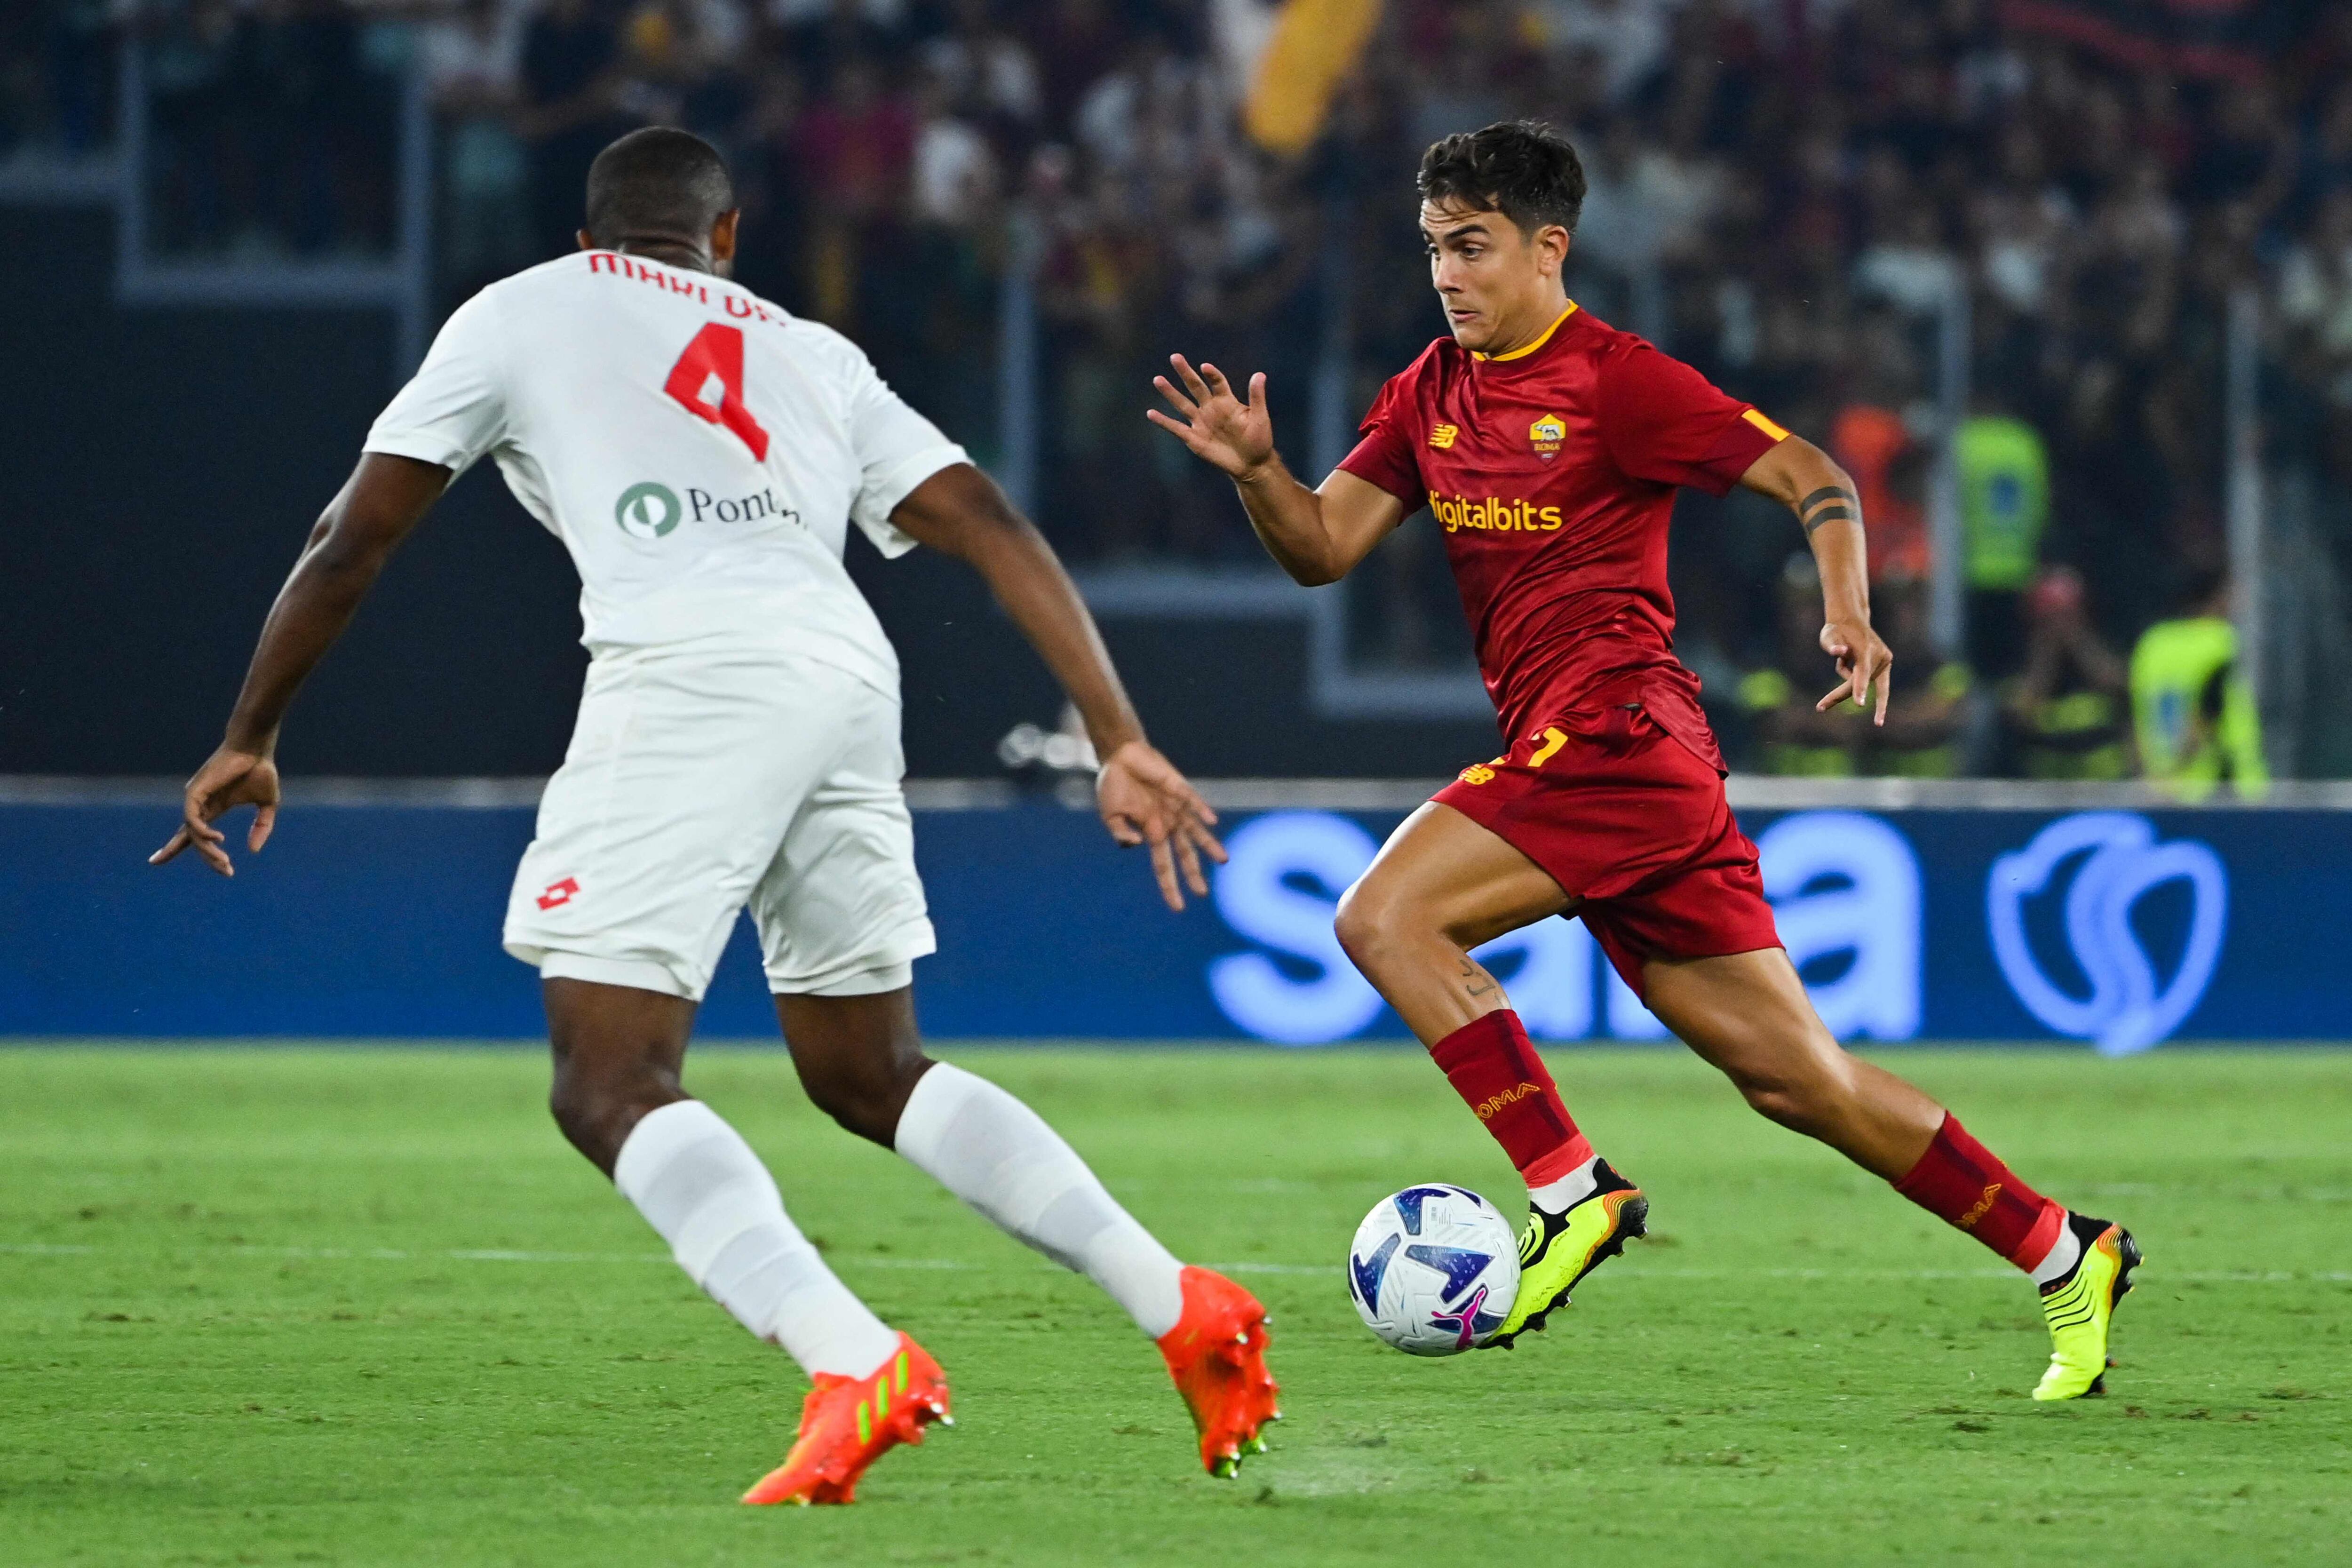 AS Roma's Argentinian forward Paulo Dybala (R) challenges Monza's Brazilian defender Marlon during the Italian Serie A football match between AS Roma and Monza on August 30, 2022 at the Olympic stadium in Rome. (Photo by Alberto PIZZOLI / AFP)